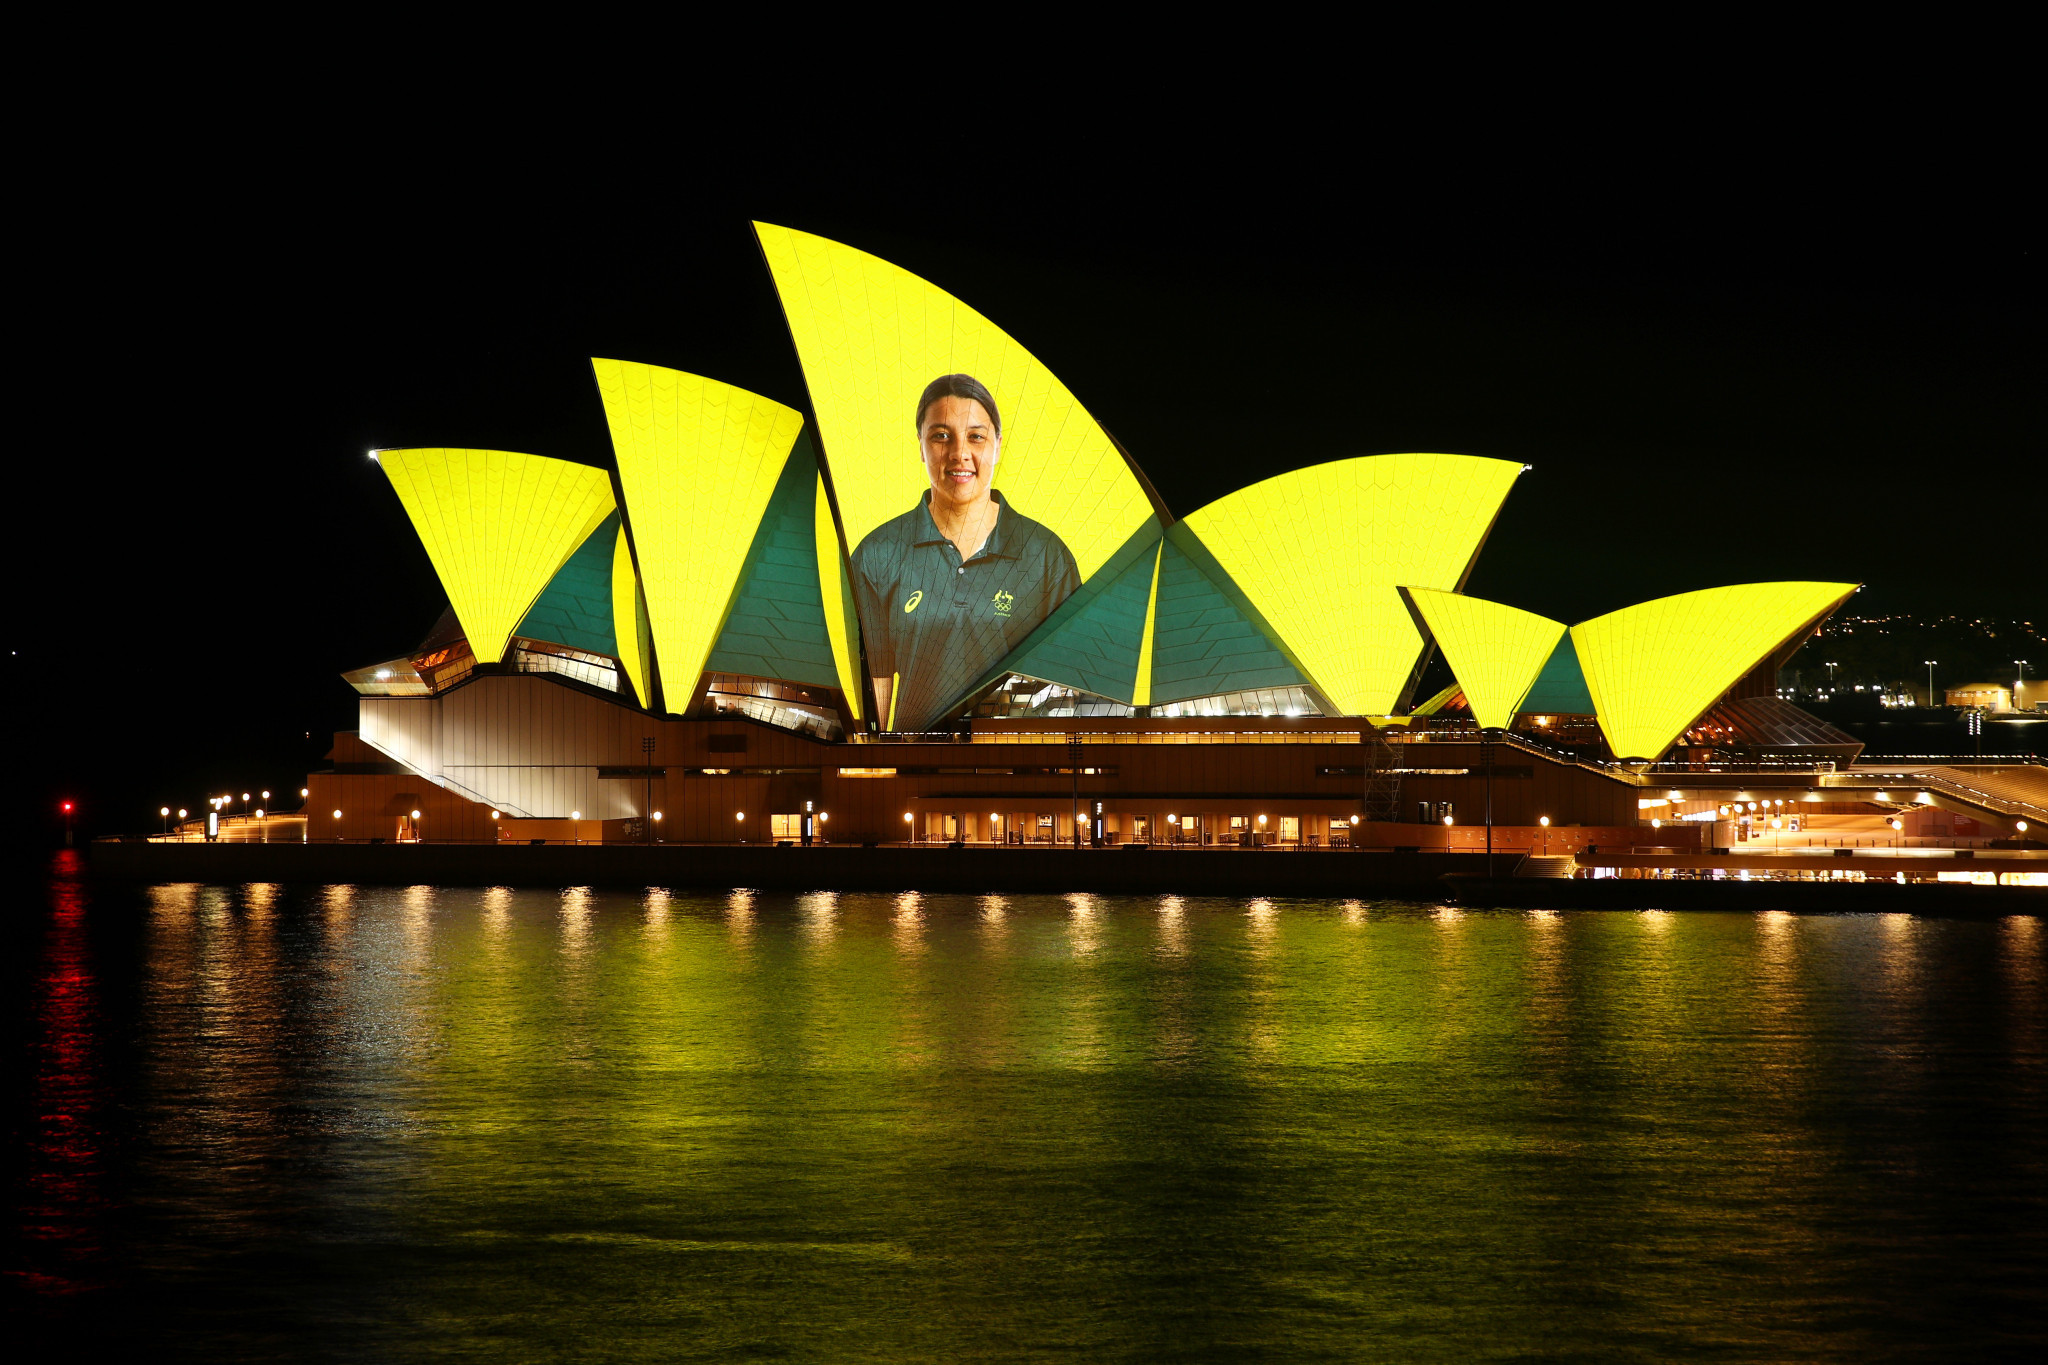 Sam Kerr's image has been projected onto the Sydney Opera House in recognition of her achievements in football ©Getty Images